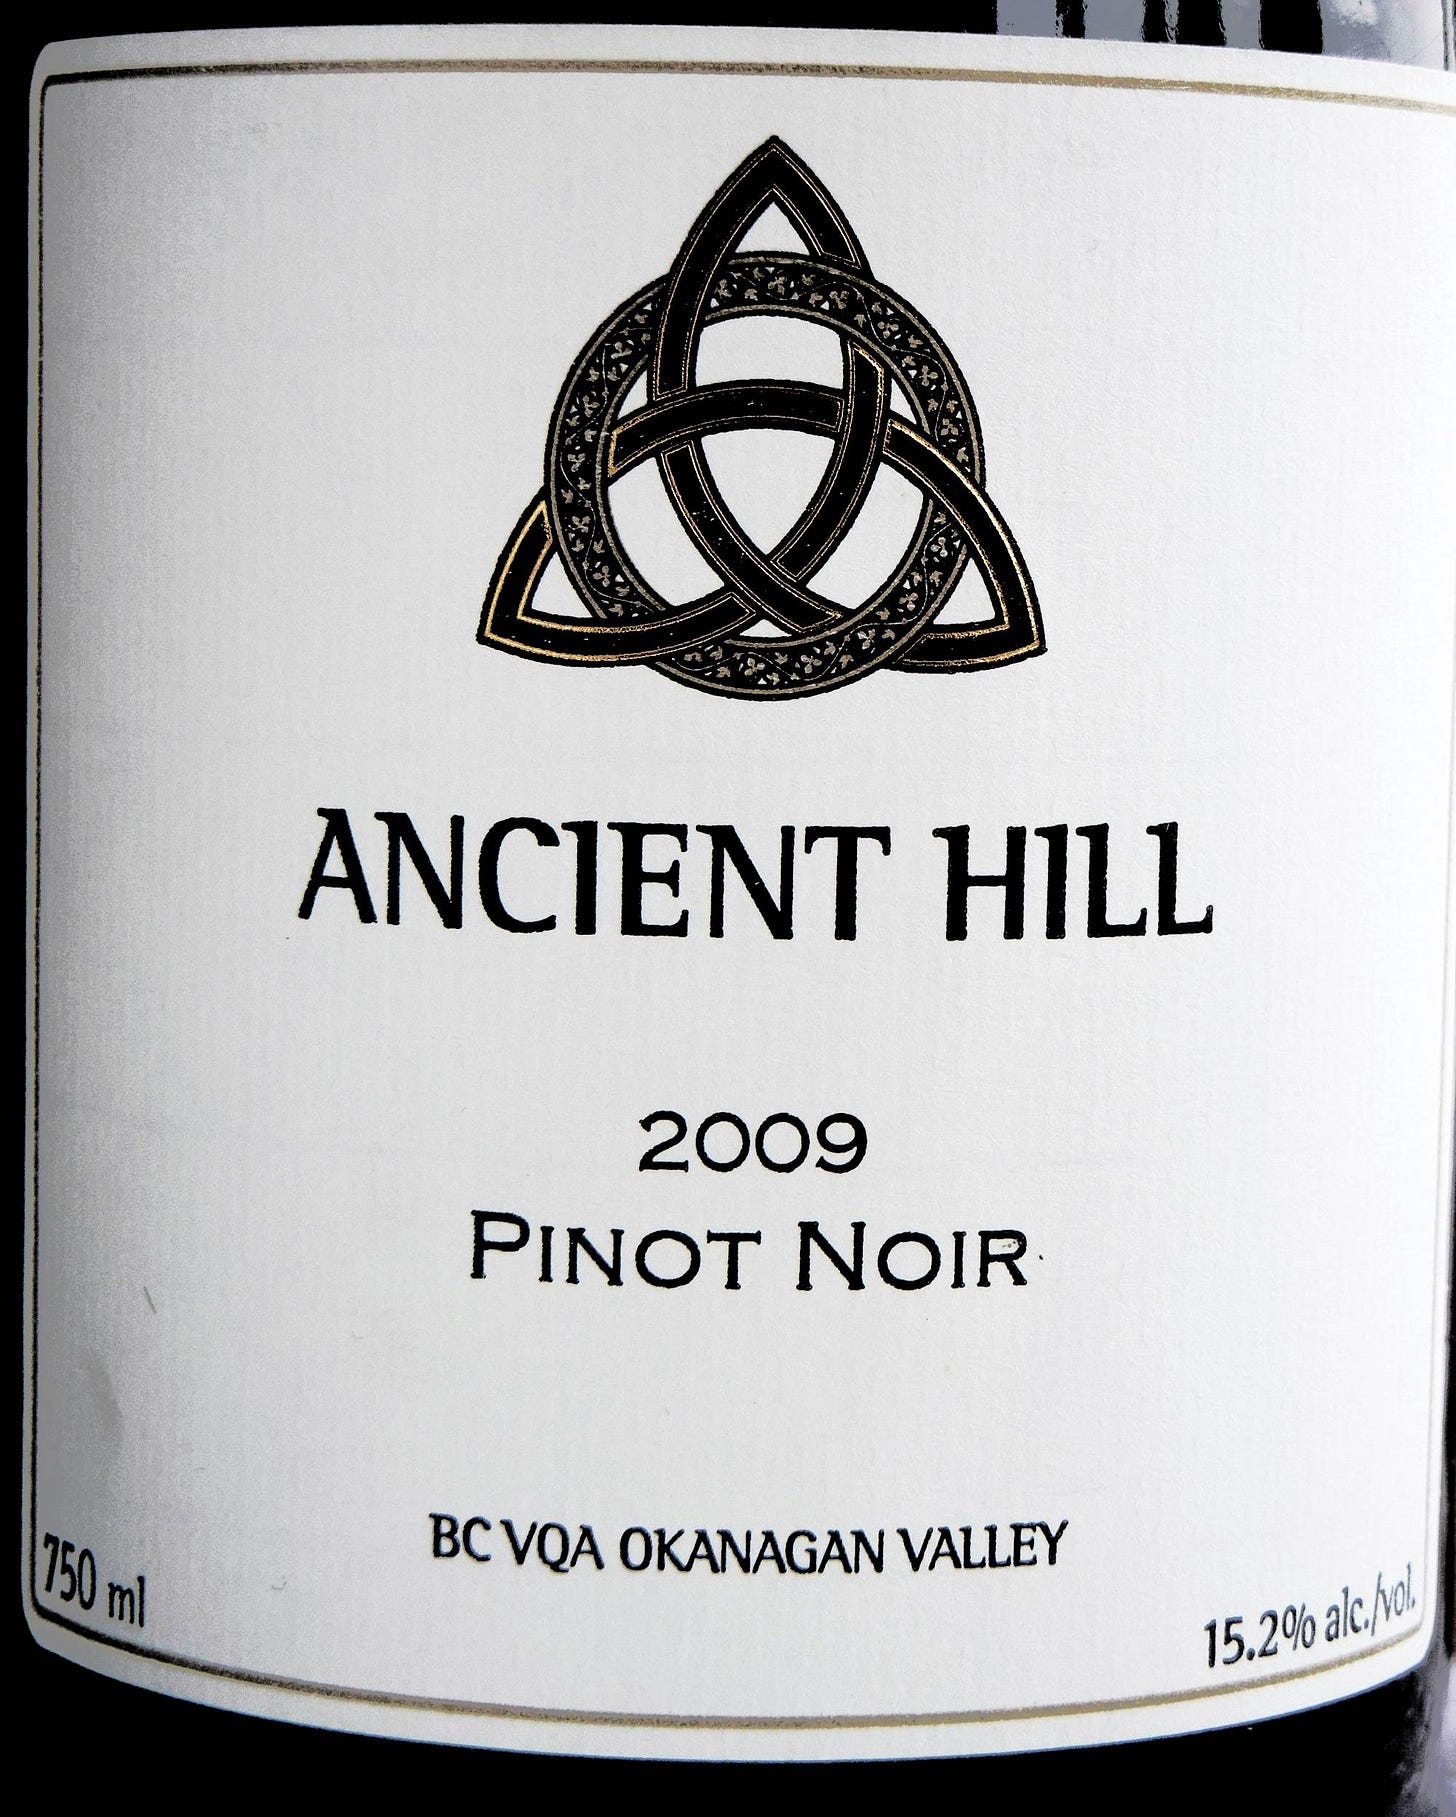 Ancient Hill Pinot Noir 2009 Label - BC Pinot Noir Tasting Review 15